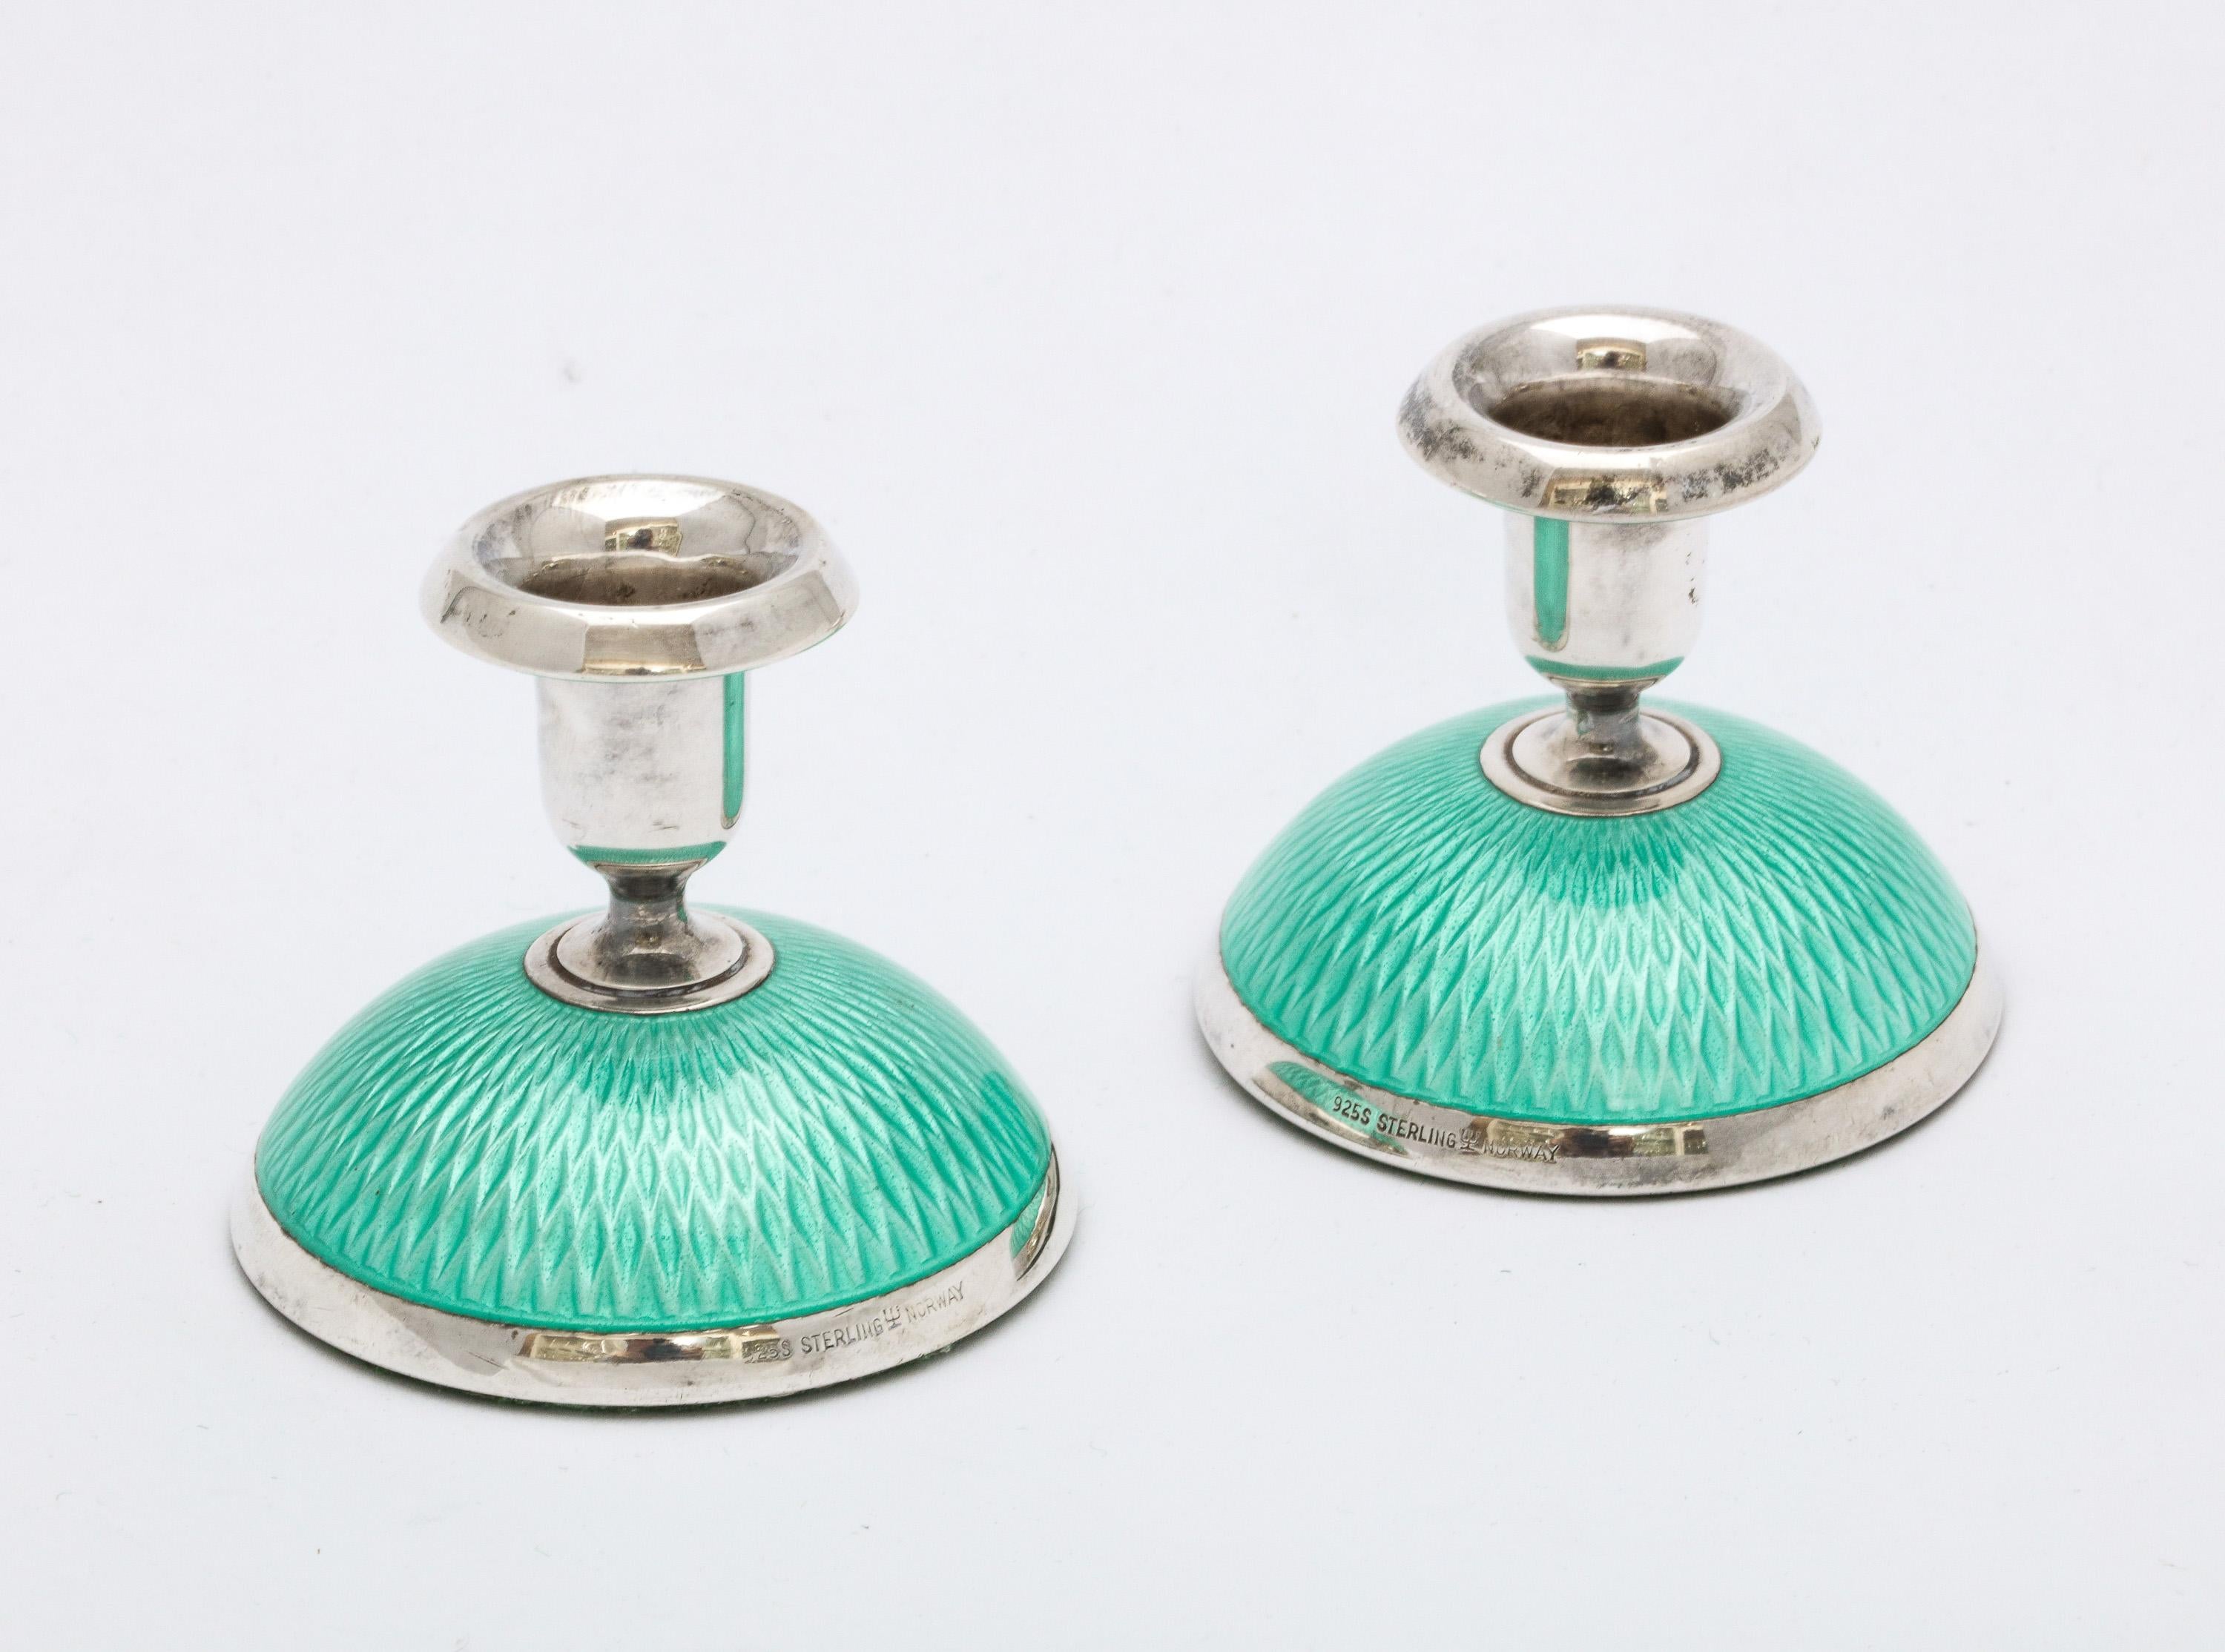 Pair of Art Deco Norwegian Sterling Silver and Turquoise Enamel Candlesticks 1